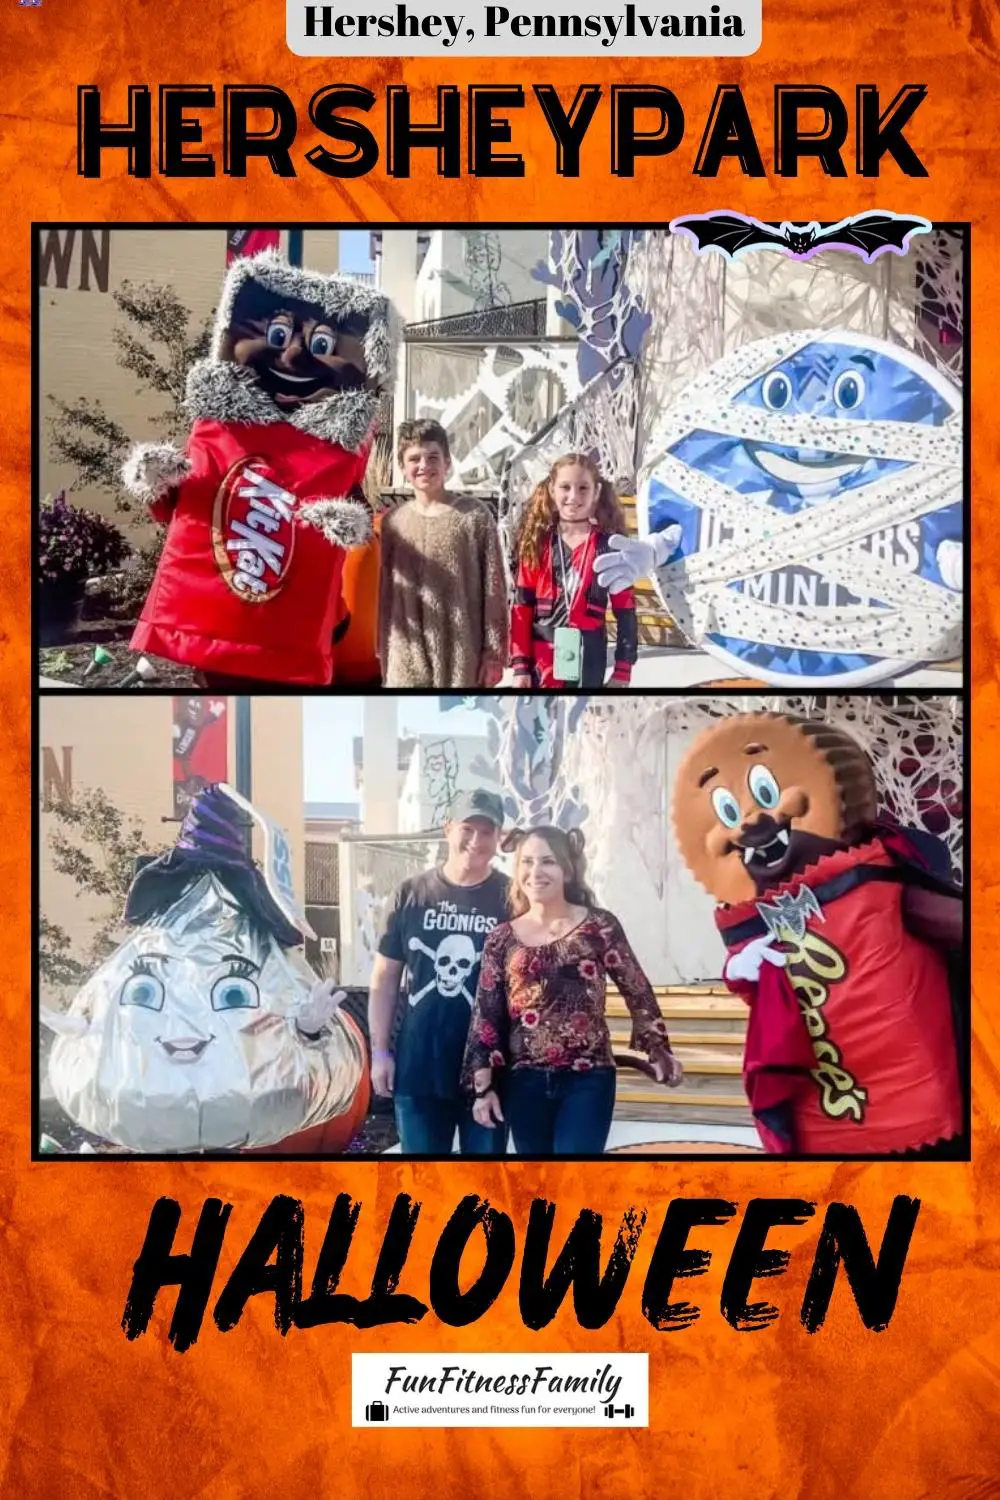 Hersheypark Halloween is a fun fall event in the Northeast US with theme park rides, entertainment, trick or treating, haunted houses and more for all ages. #familytravel #hersheypa #hersheypark #pennsylvania #themepark #UStravel 